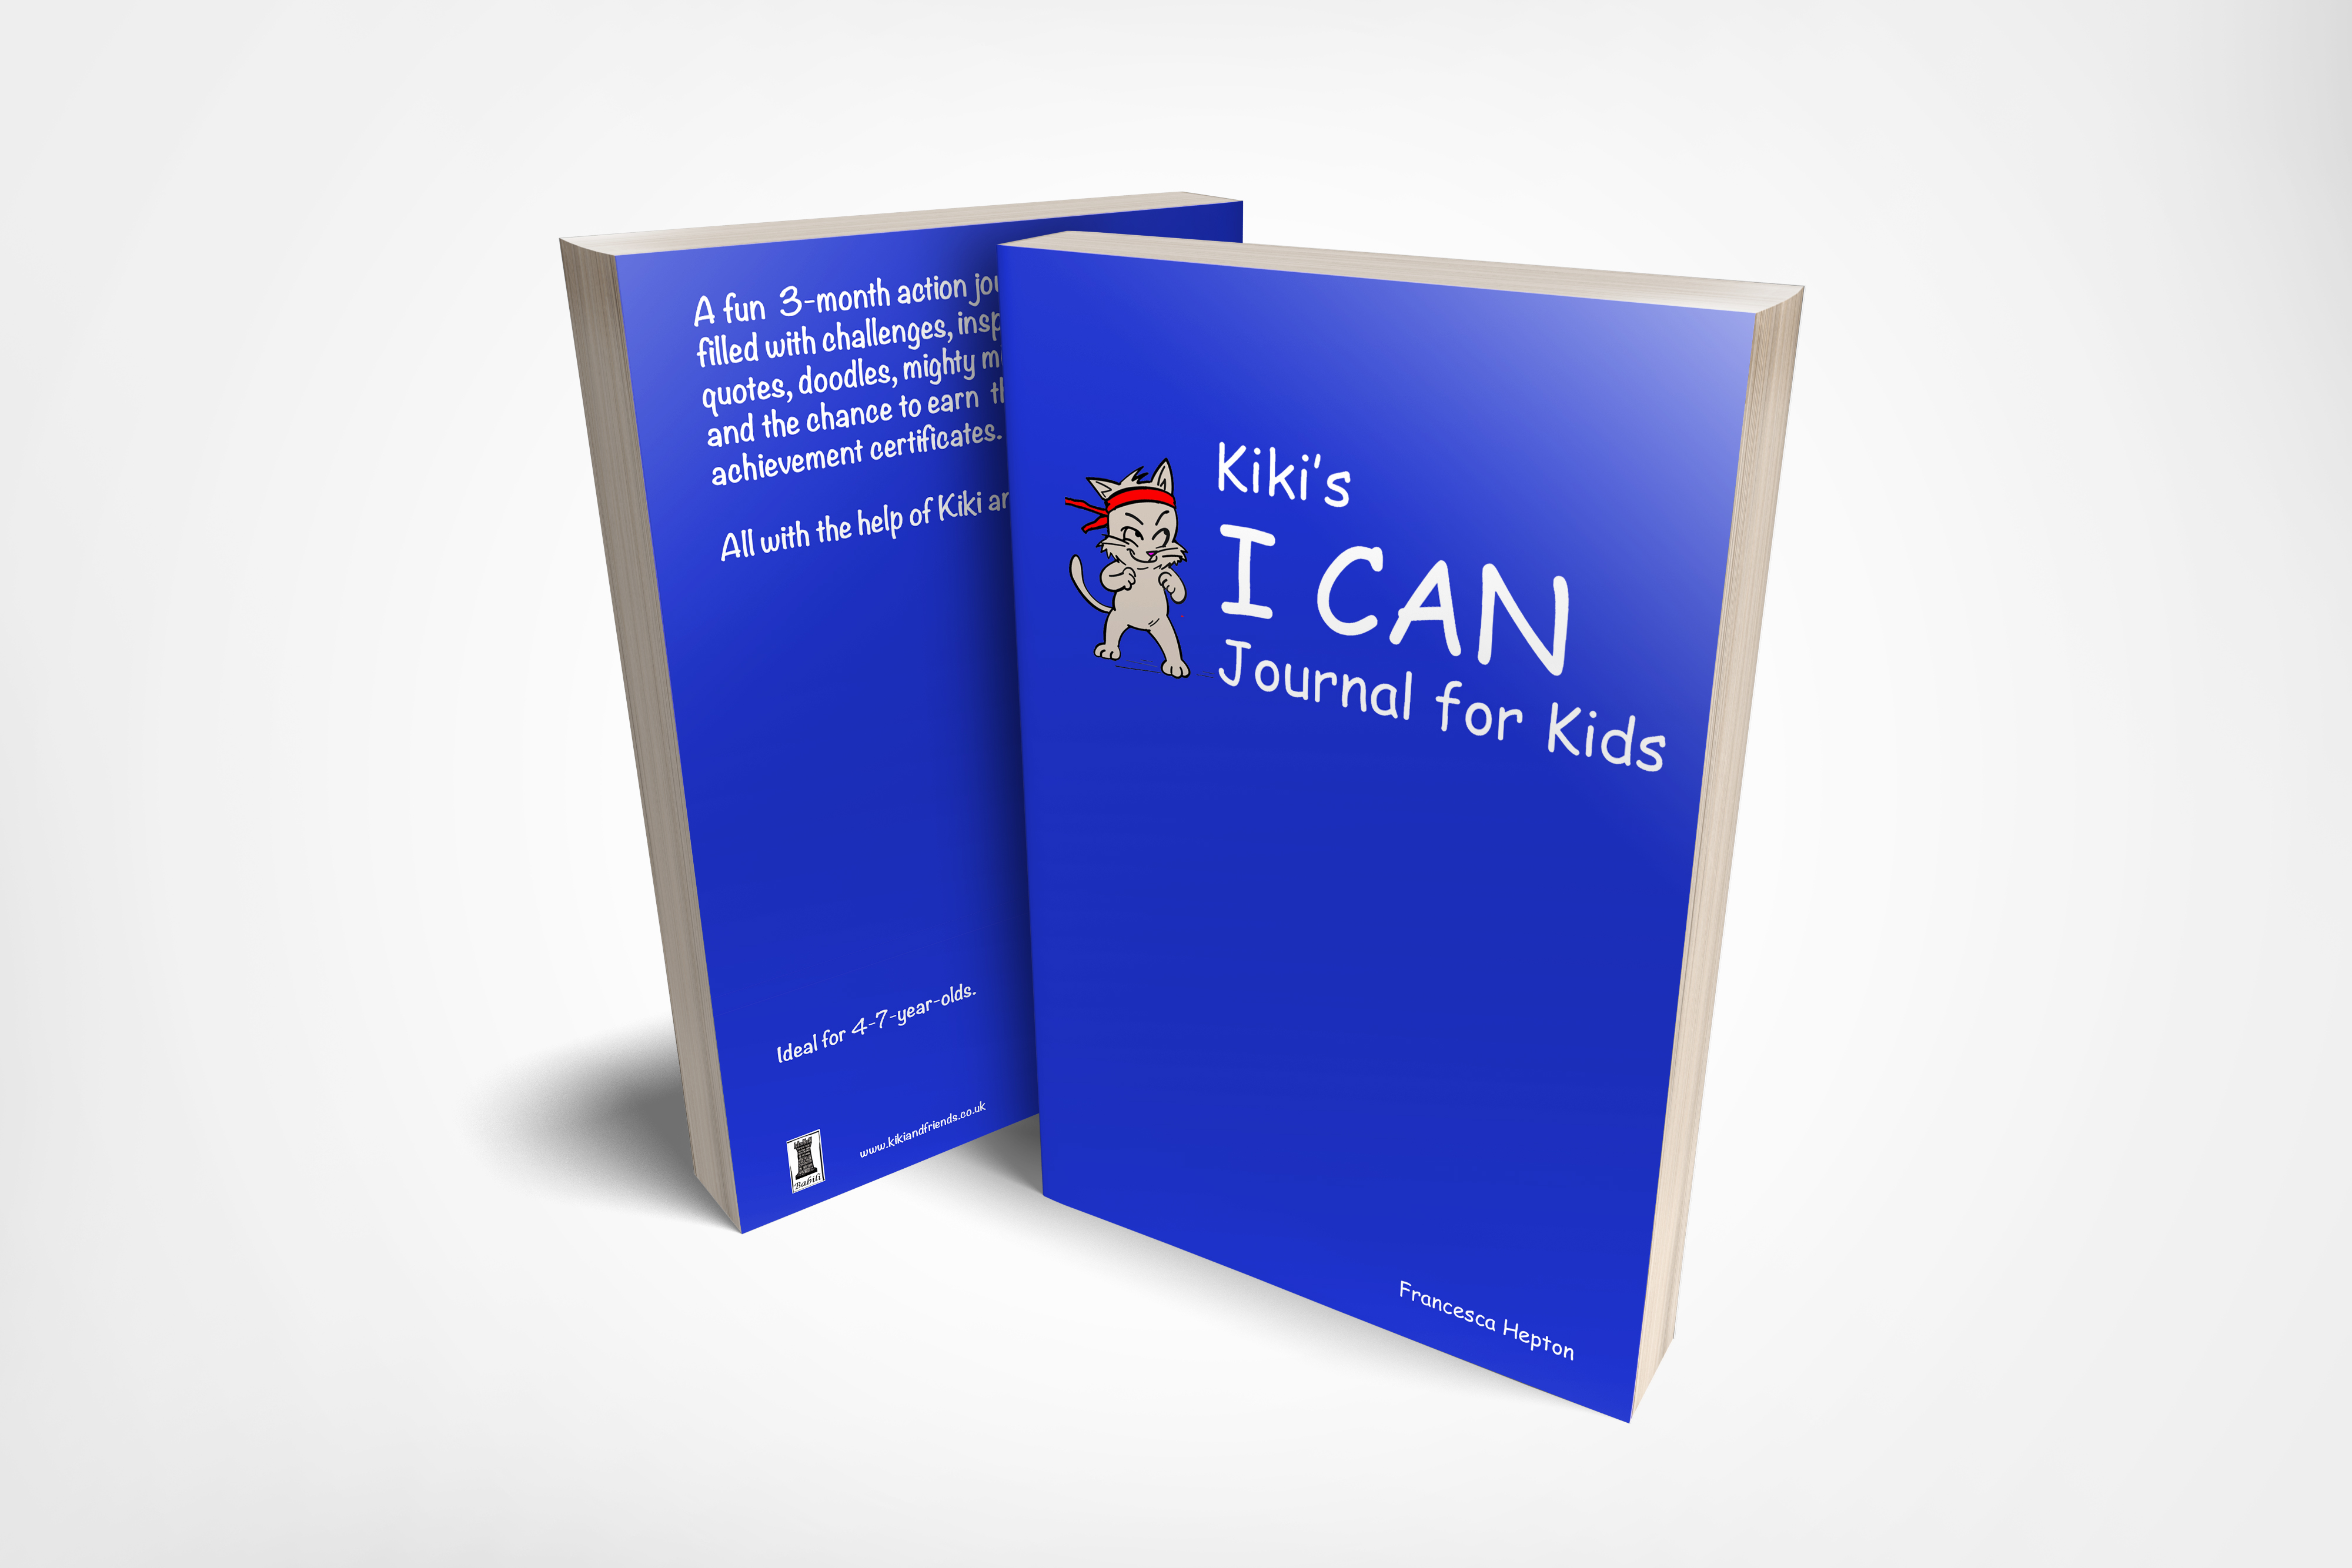 3-Month Daily Journal For Children: Kiki's I CAN Journal for Kids encourages children to look for the positive, spend time being mindful and reflect on how they feel. Its scientifically proven methods promote a confident mindset and nurture healthy choices.